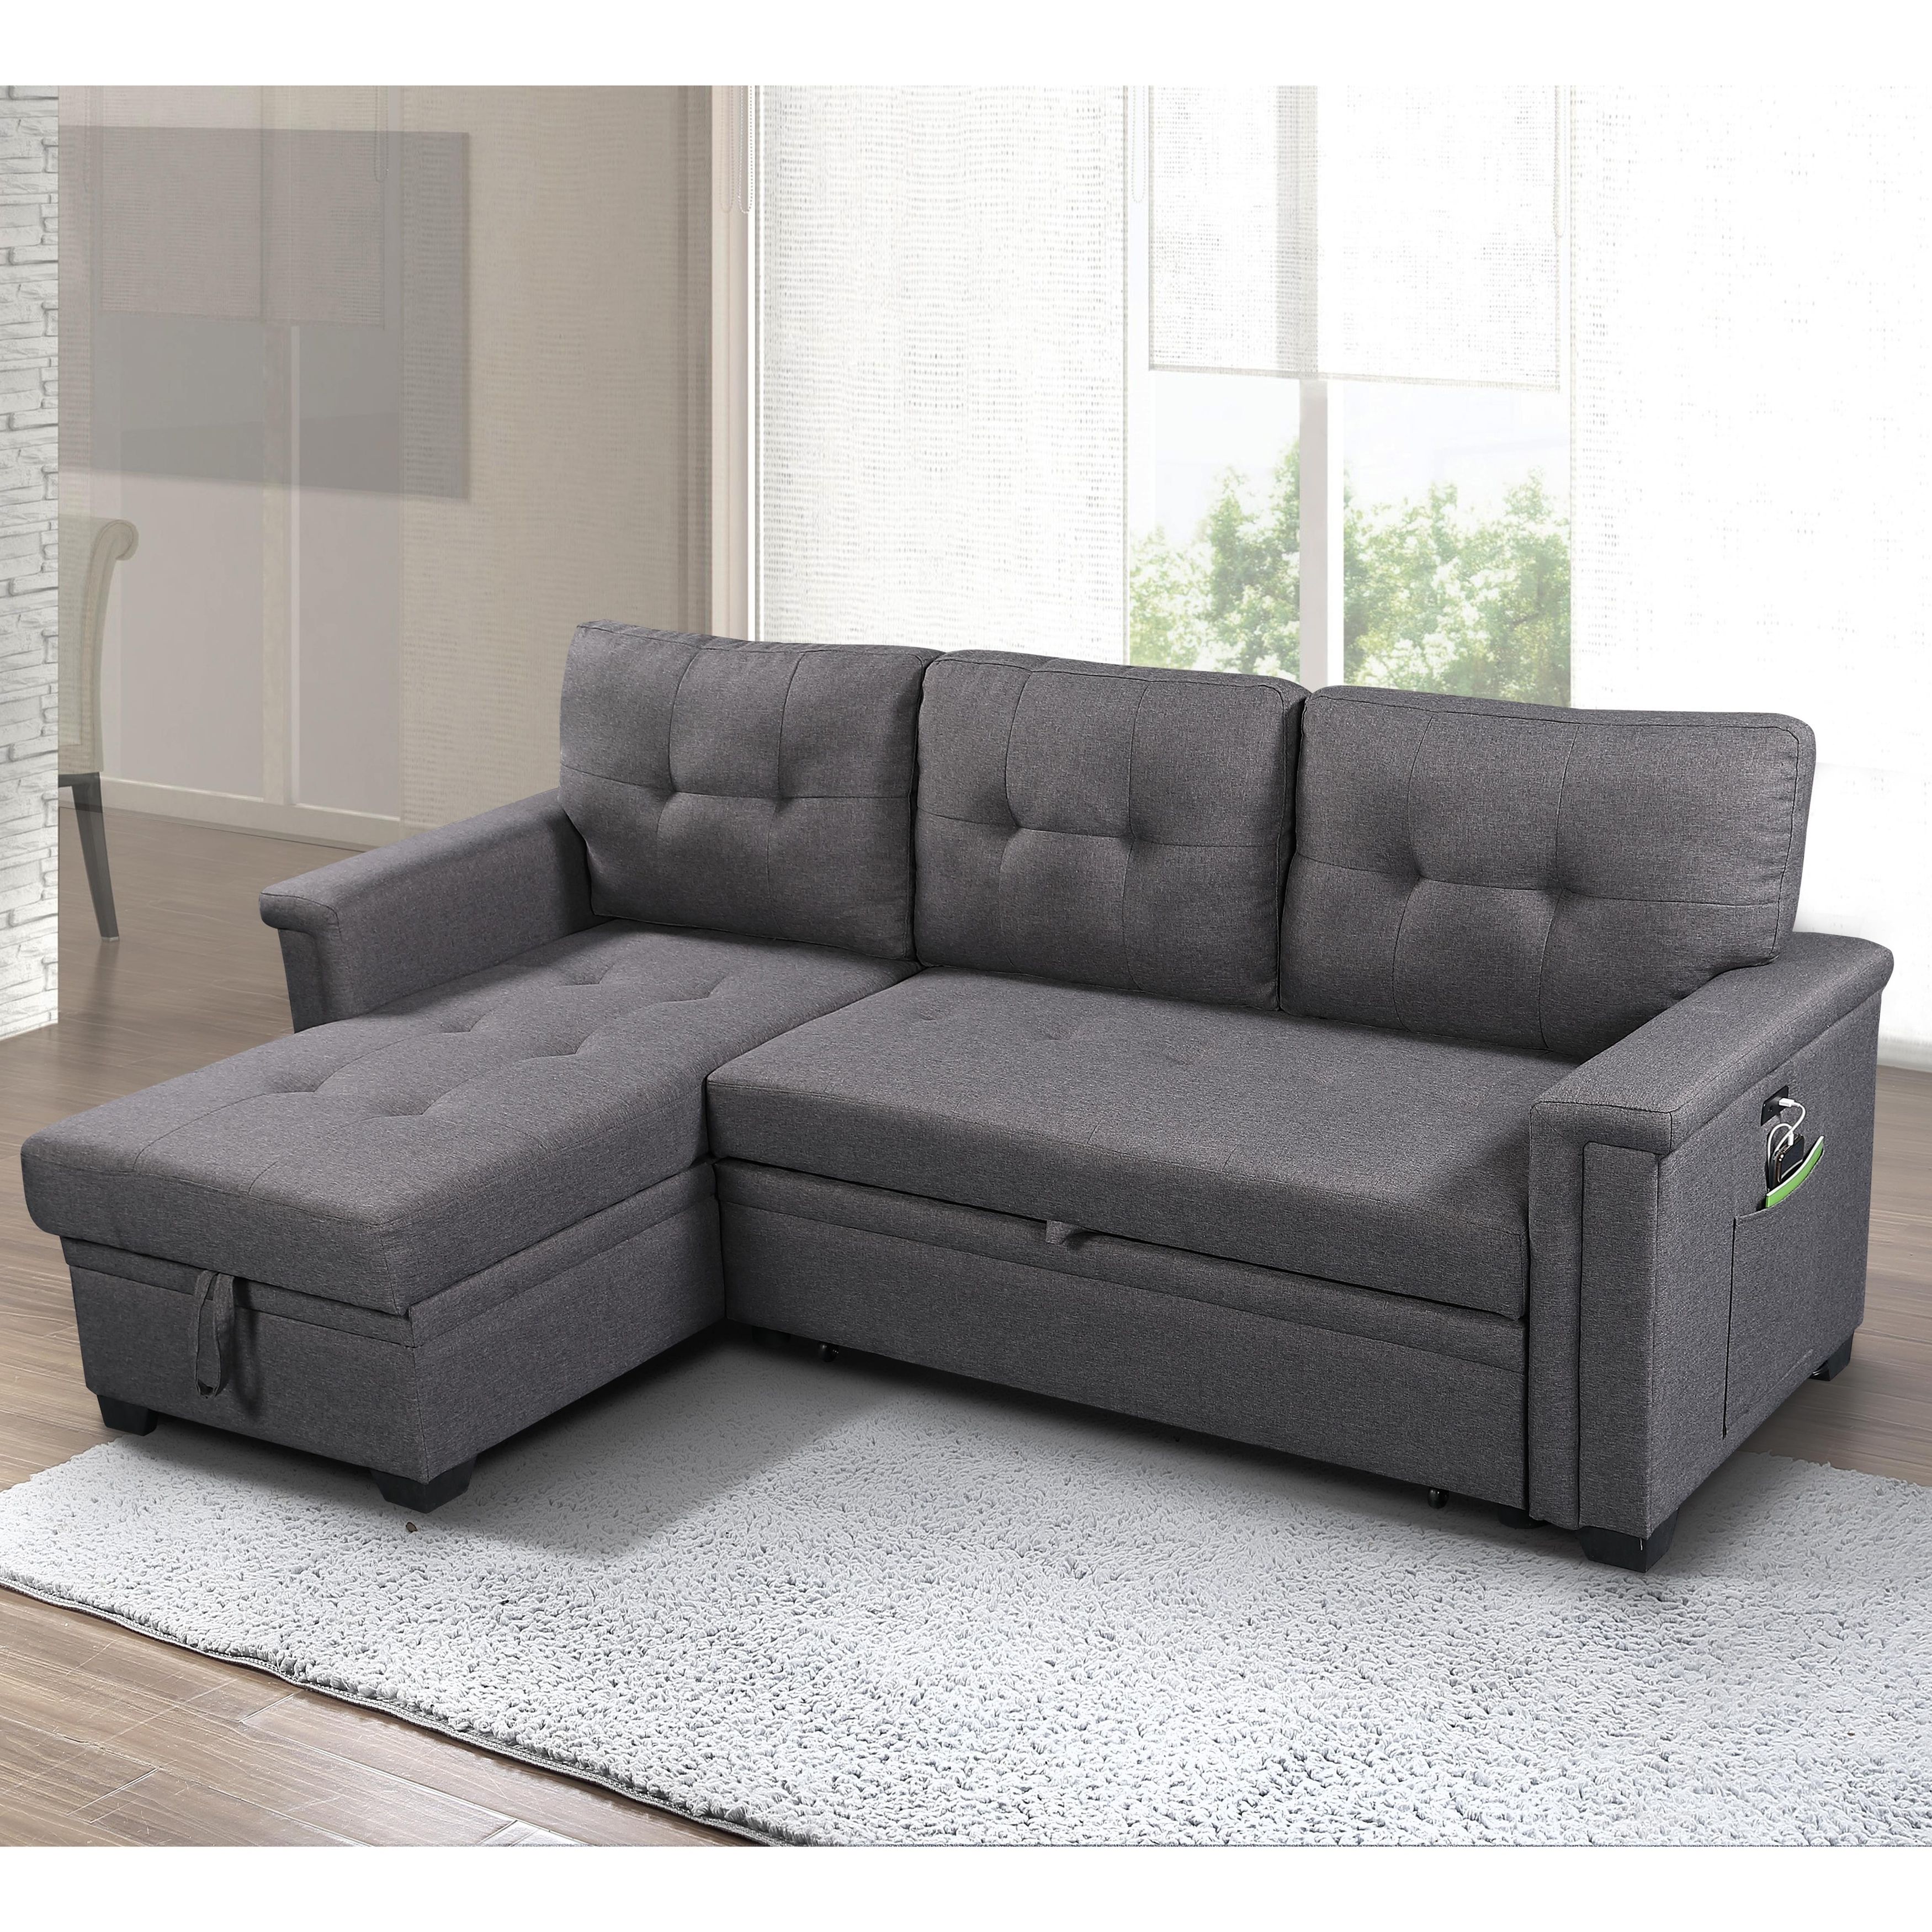 Ashlyn Reversible Sleeper Sofa With Storage Chaise – On Sale – – 30144937 Within Sectional Sofa With Storage (View 2 of 20)